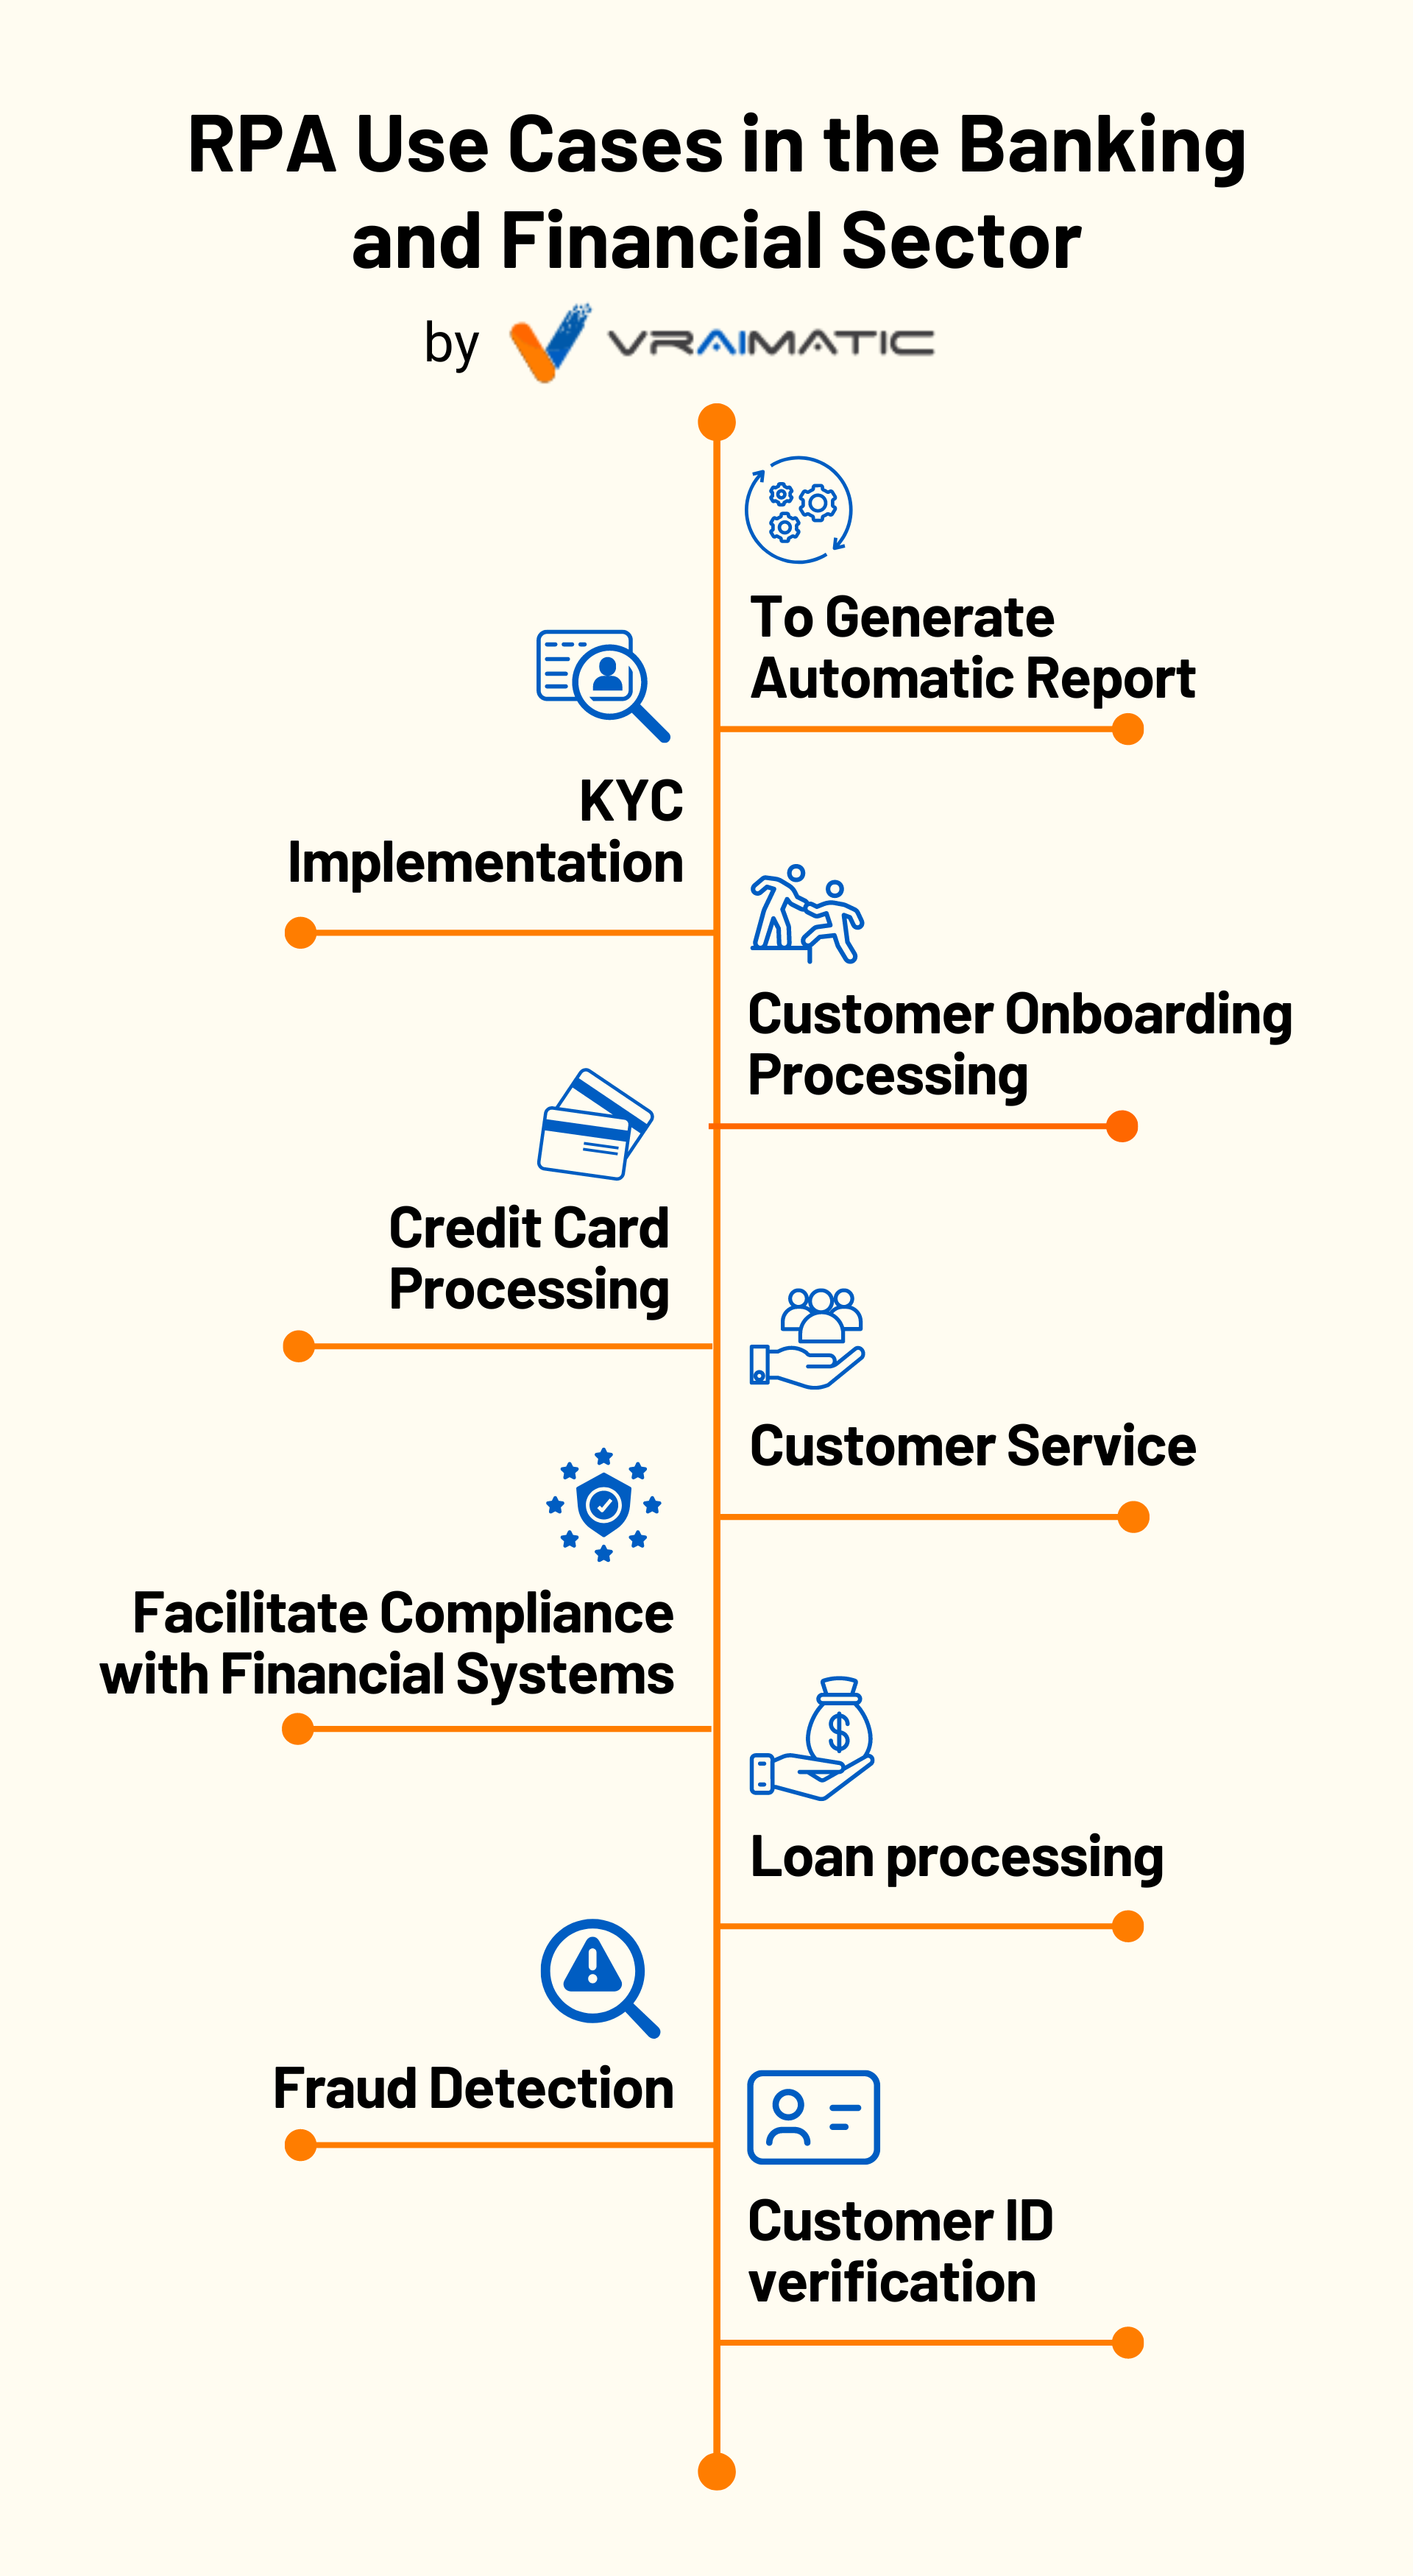 RPA in banking and financial sector infographic